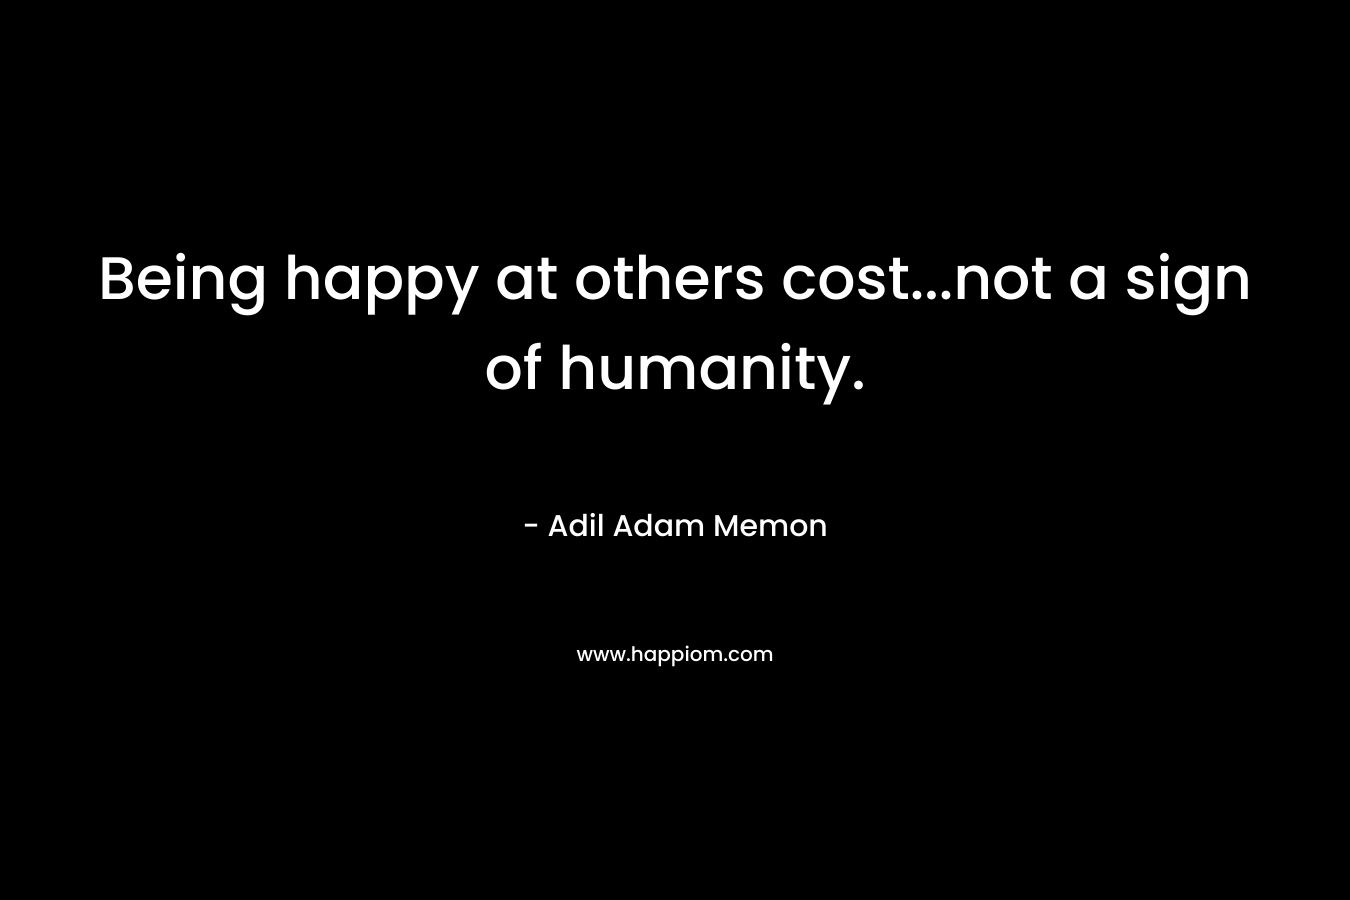 Being happy at others cost...not a sign of humanity.